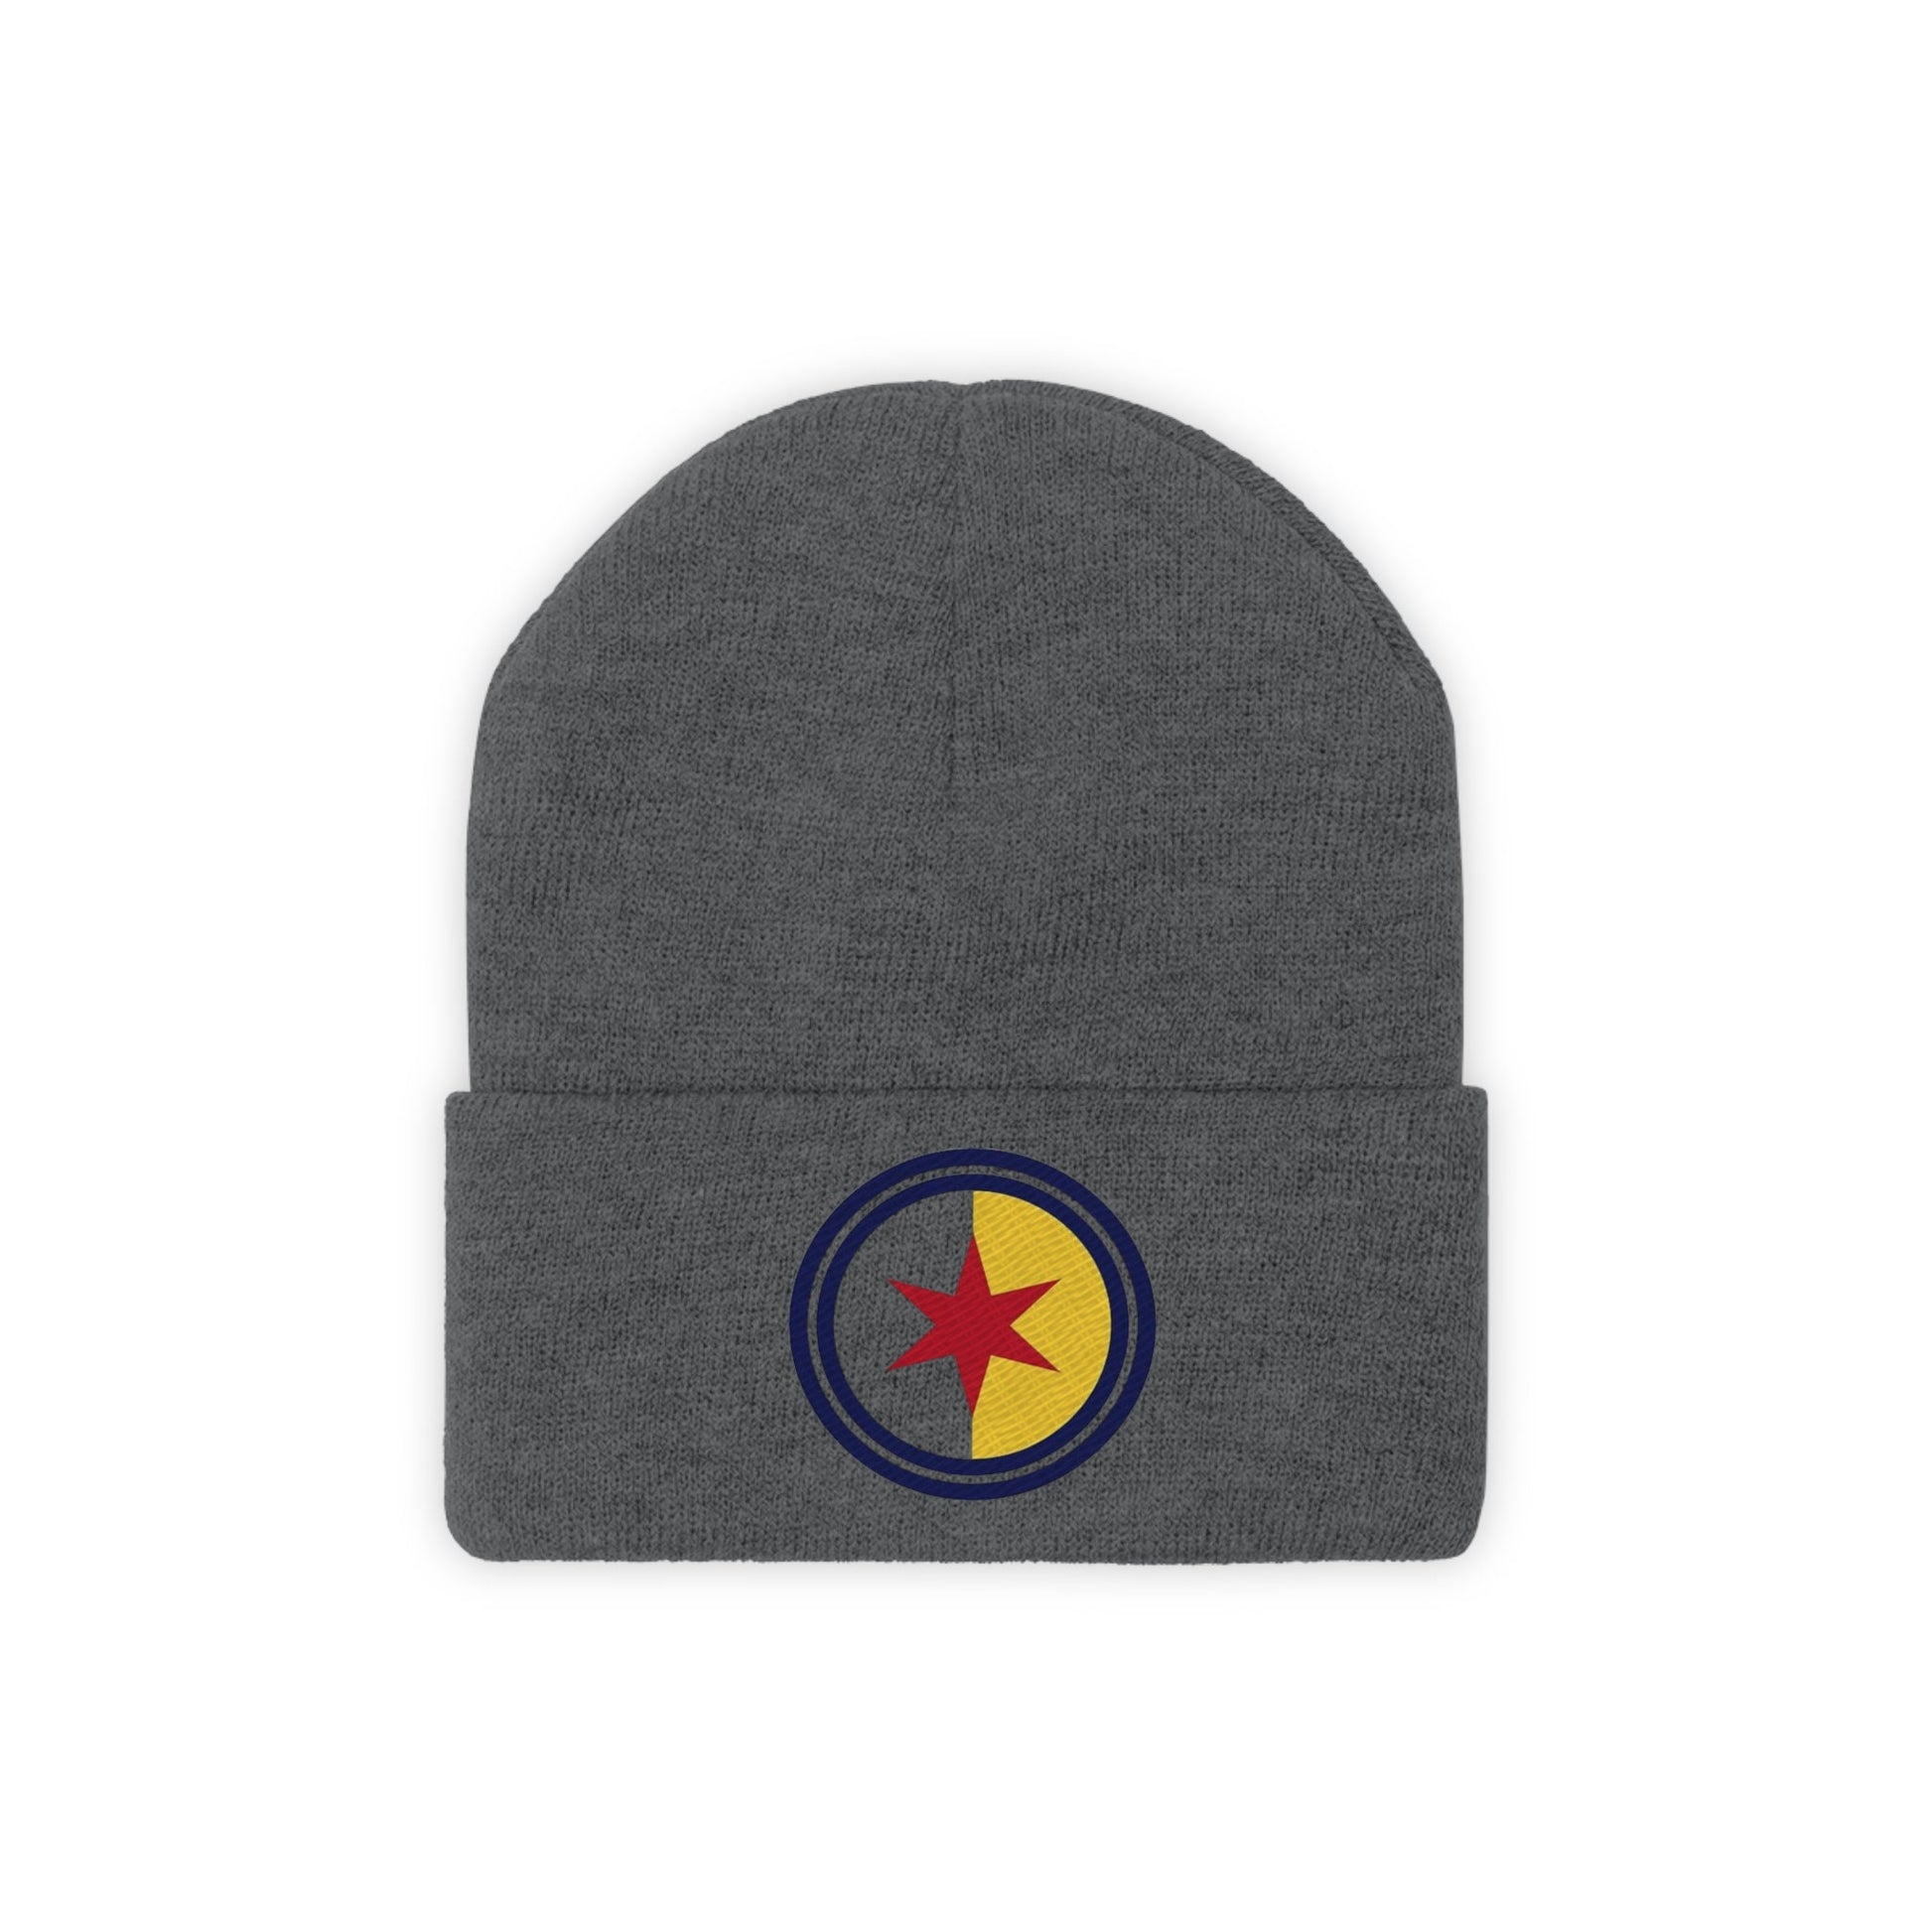 South Bend Indiana city flag Knit Beanie